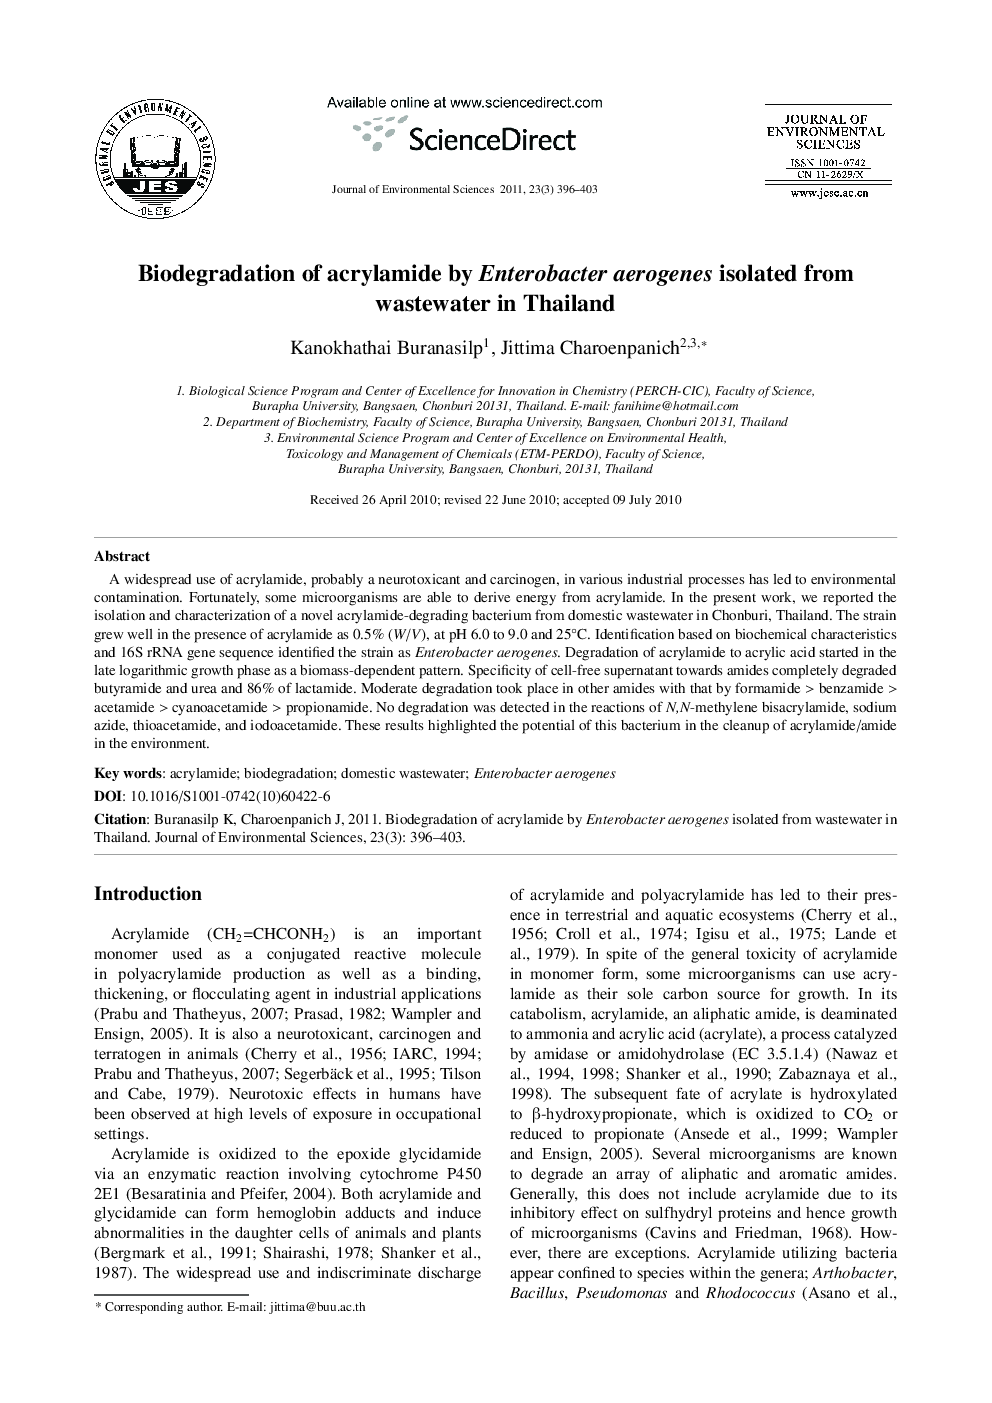 Biodegradation of acrylamide by Enterobacter aerogenes isolated from wastewater in Thailand